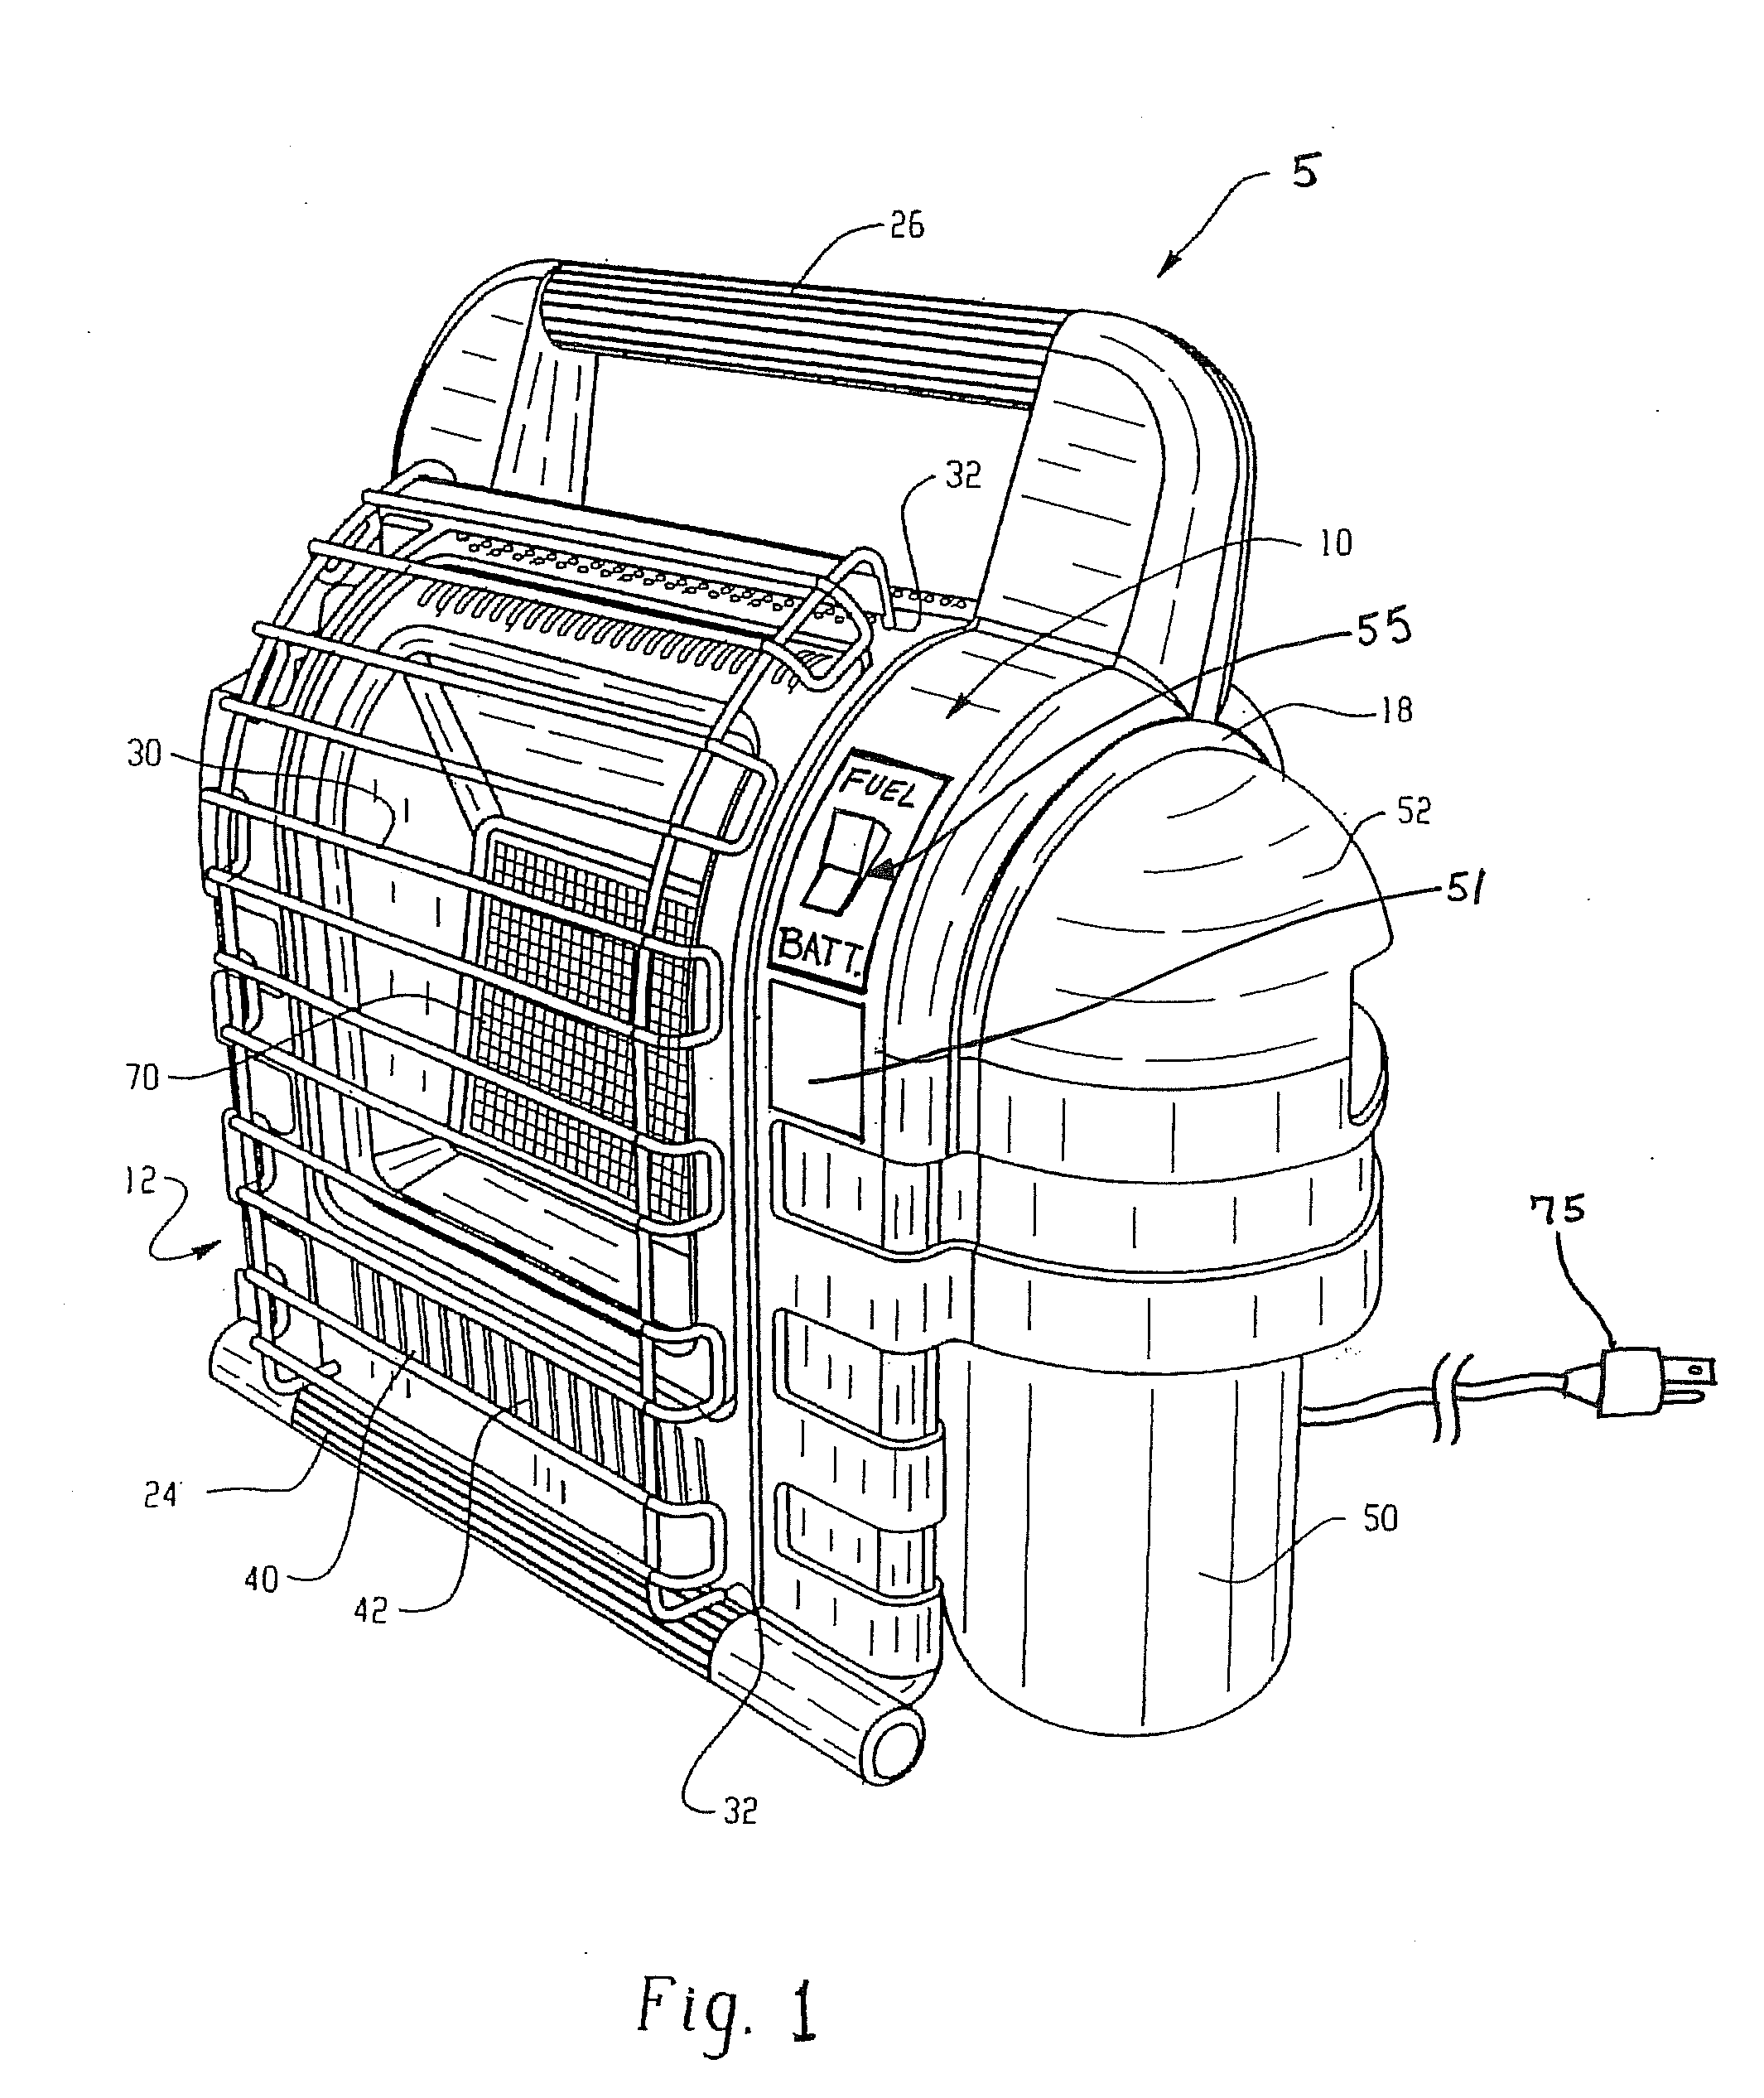 Heat and/or Light Producing Unit Powered by a Lithium Secondary Cell Battery with High Charge and Discharge Rate Capability